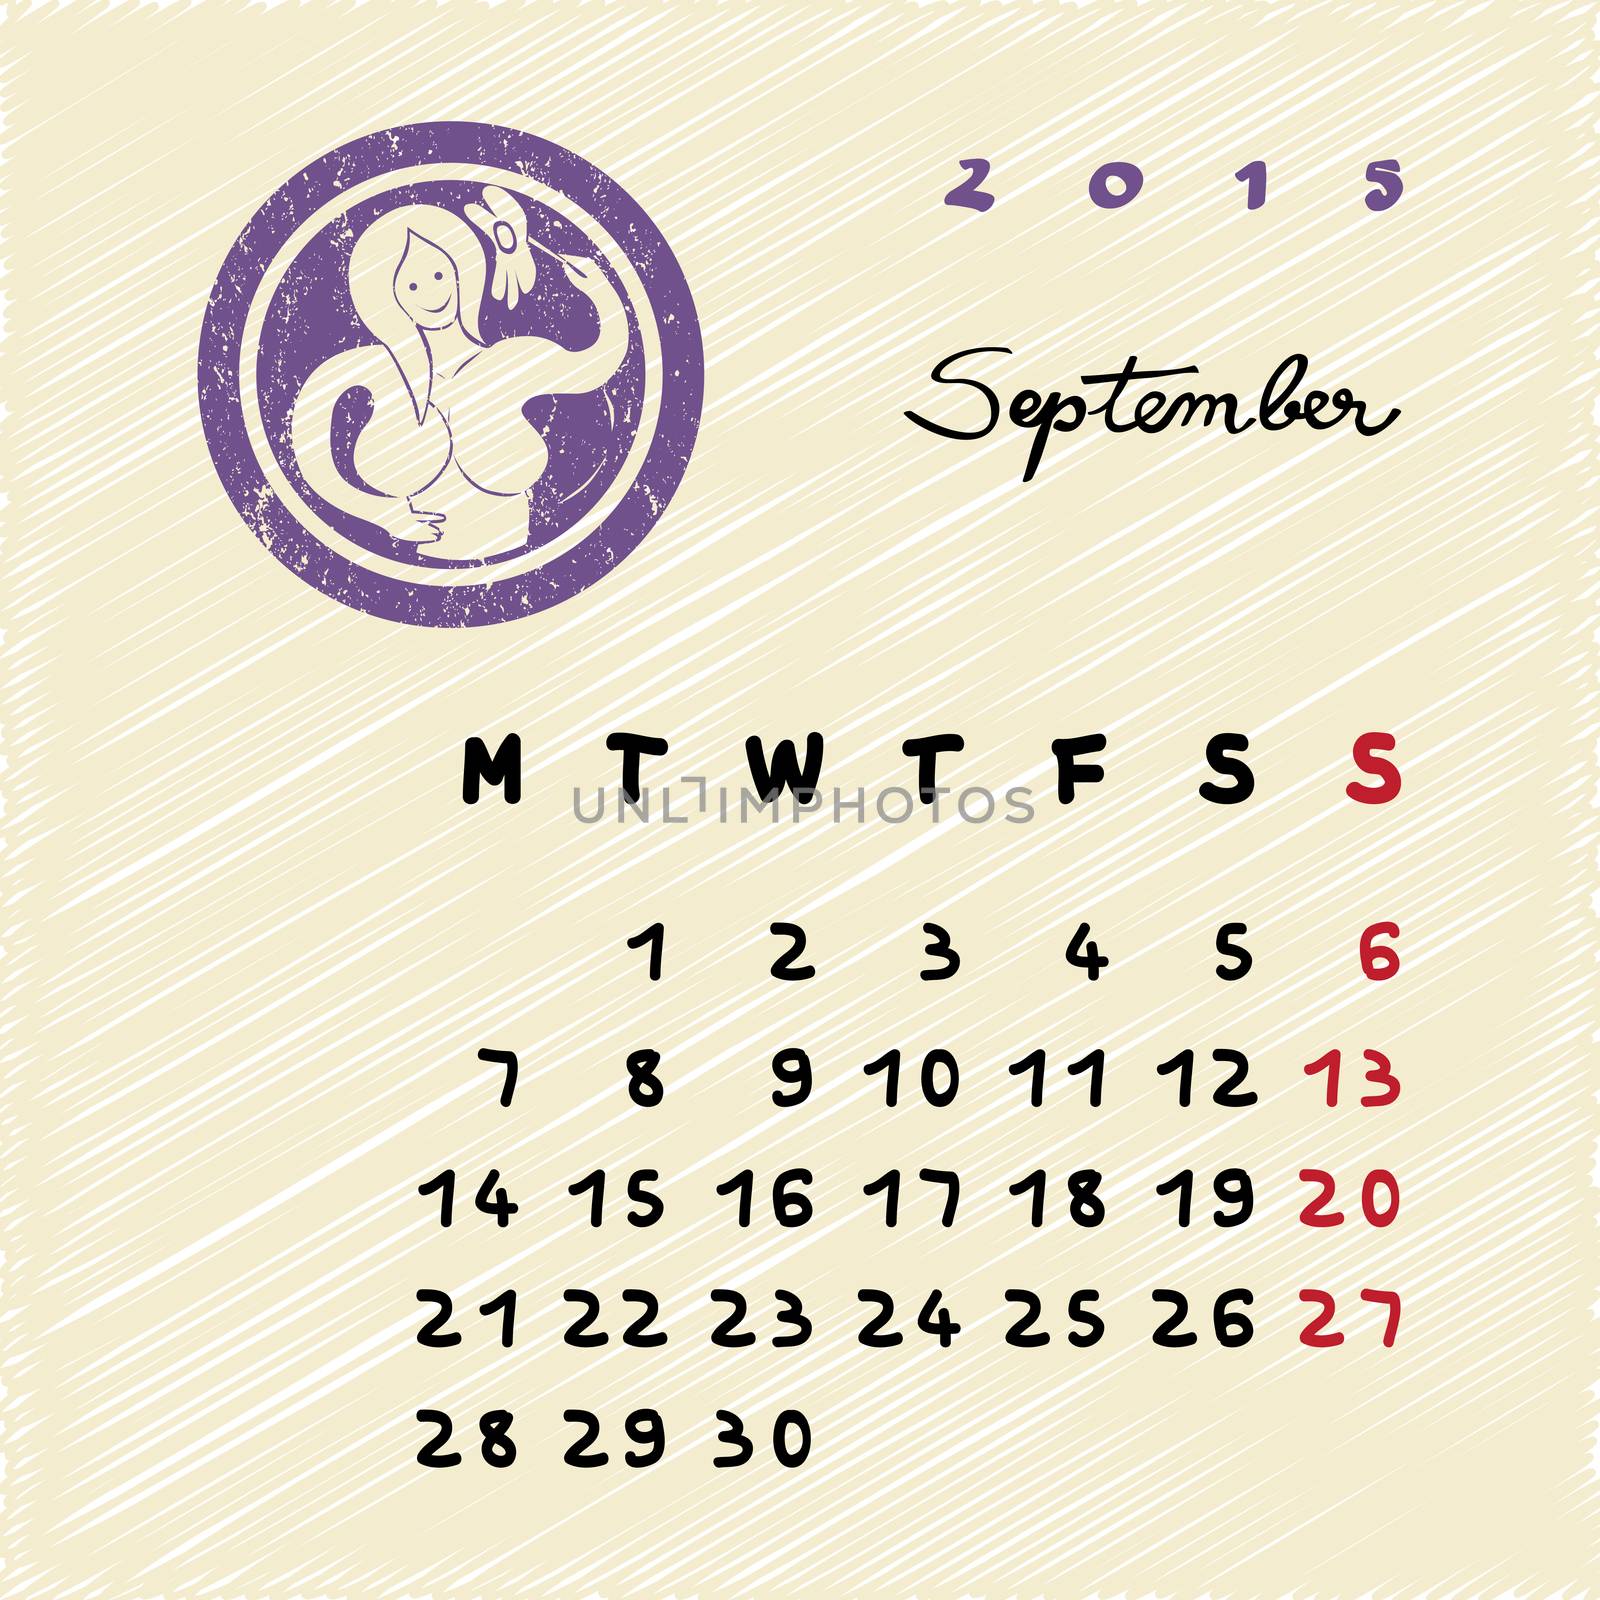 Calendar 2015 page illustration with zodiac sign of Virgo as grungy stamp over a colored scribble background, September